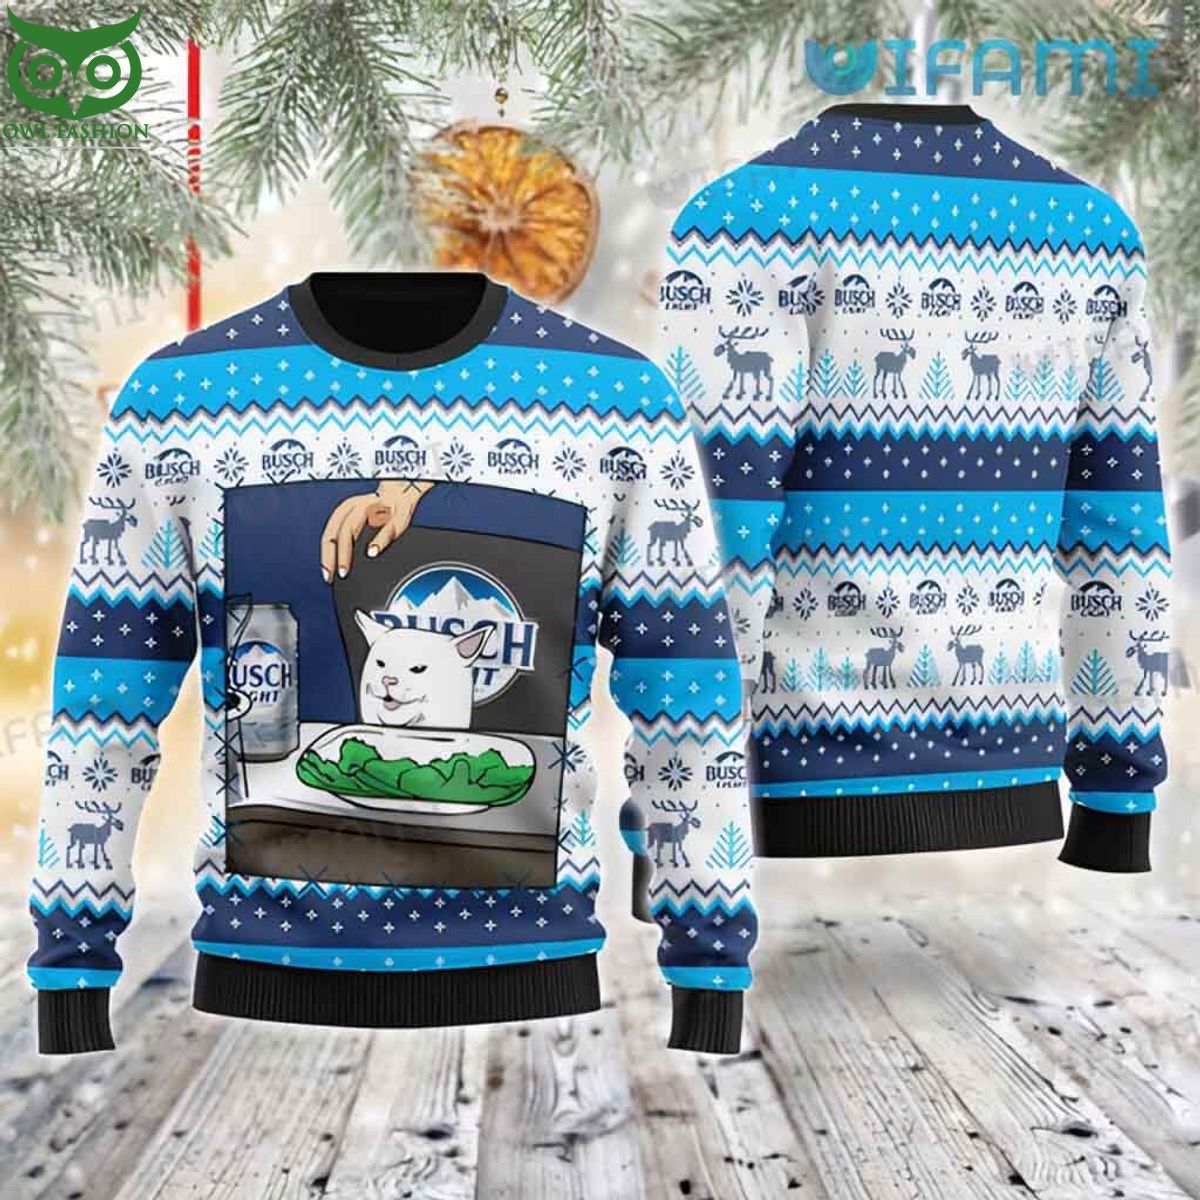 Busch Light Ugly Sweater Cat Meme Christmas Gift For Beer Lovers